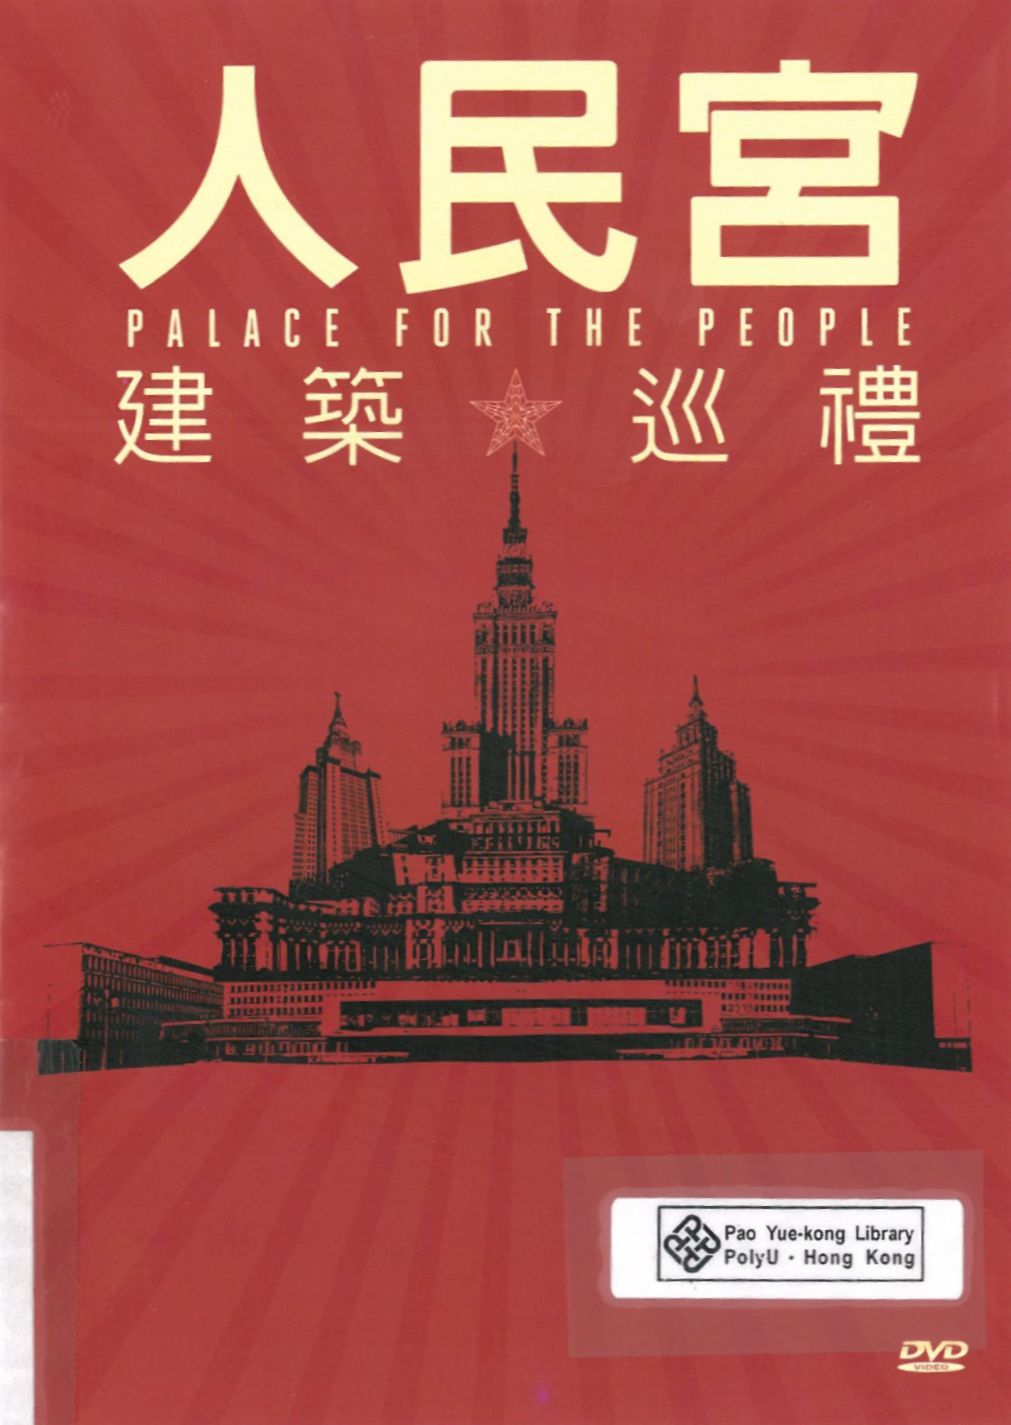 Palace for the people = 人民宮: 建築巡禮